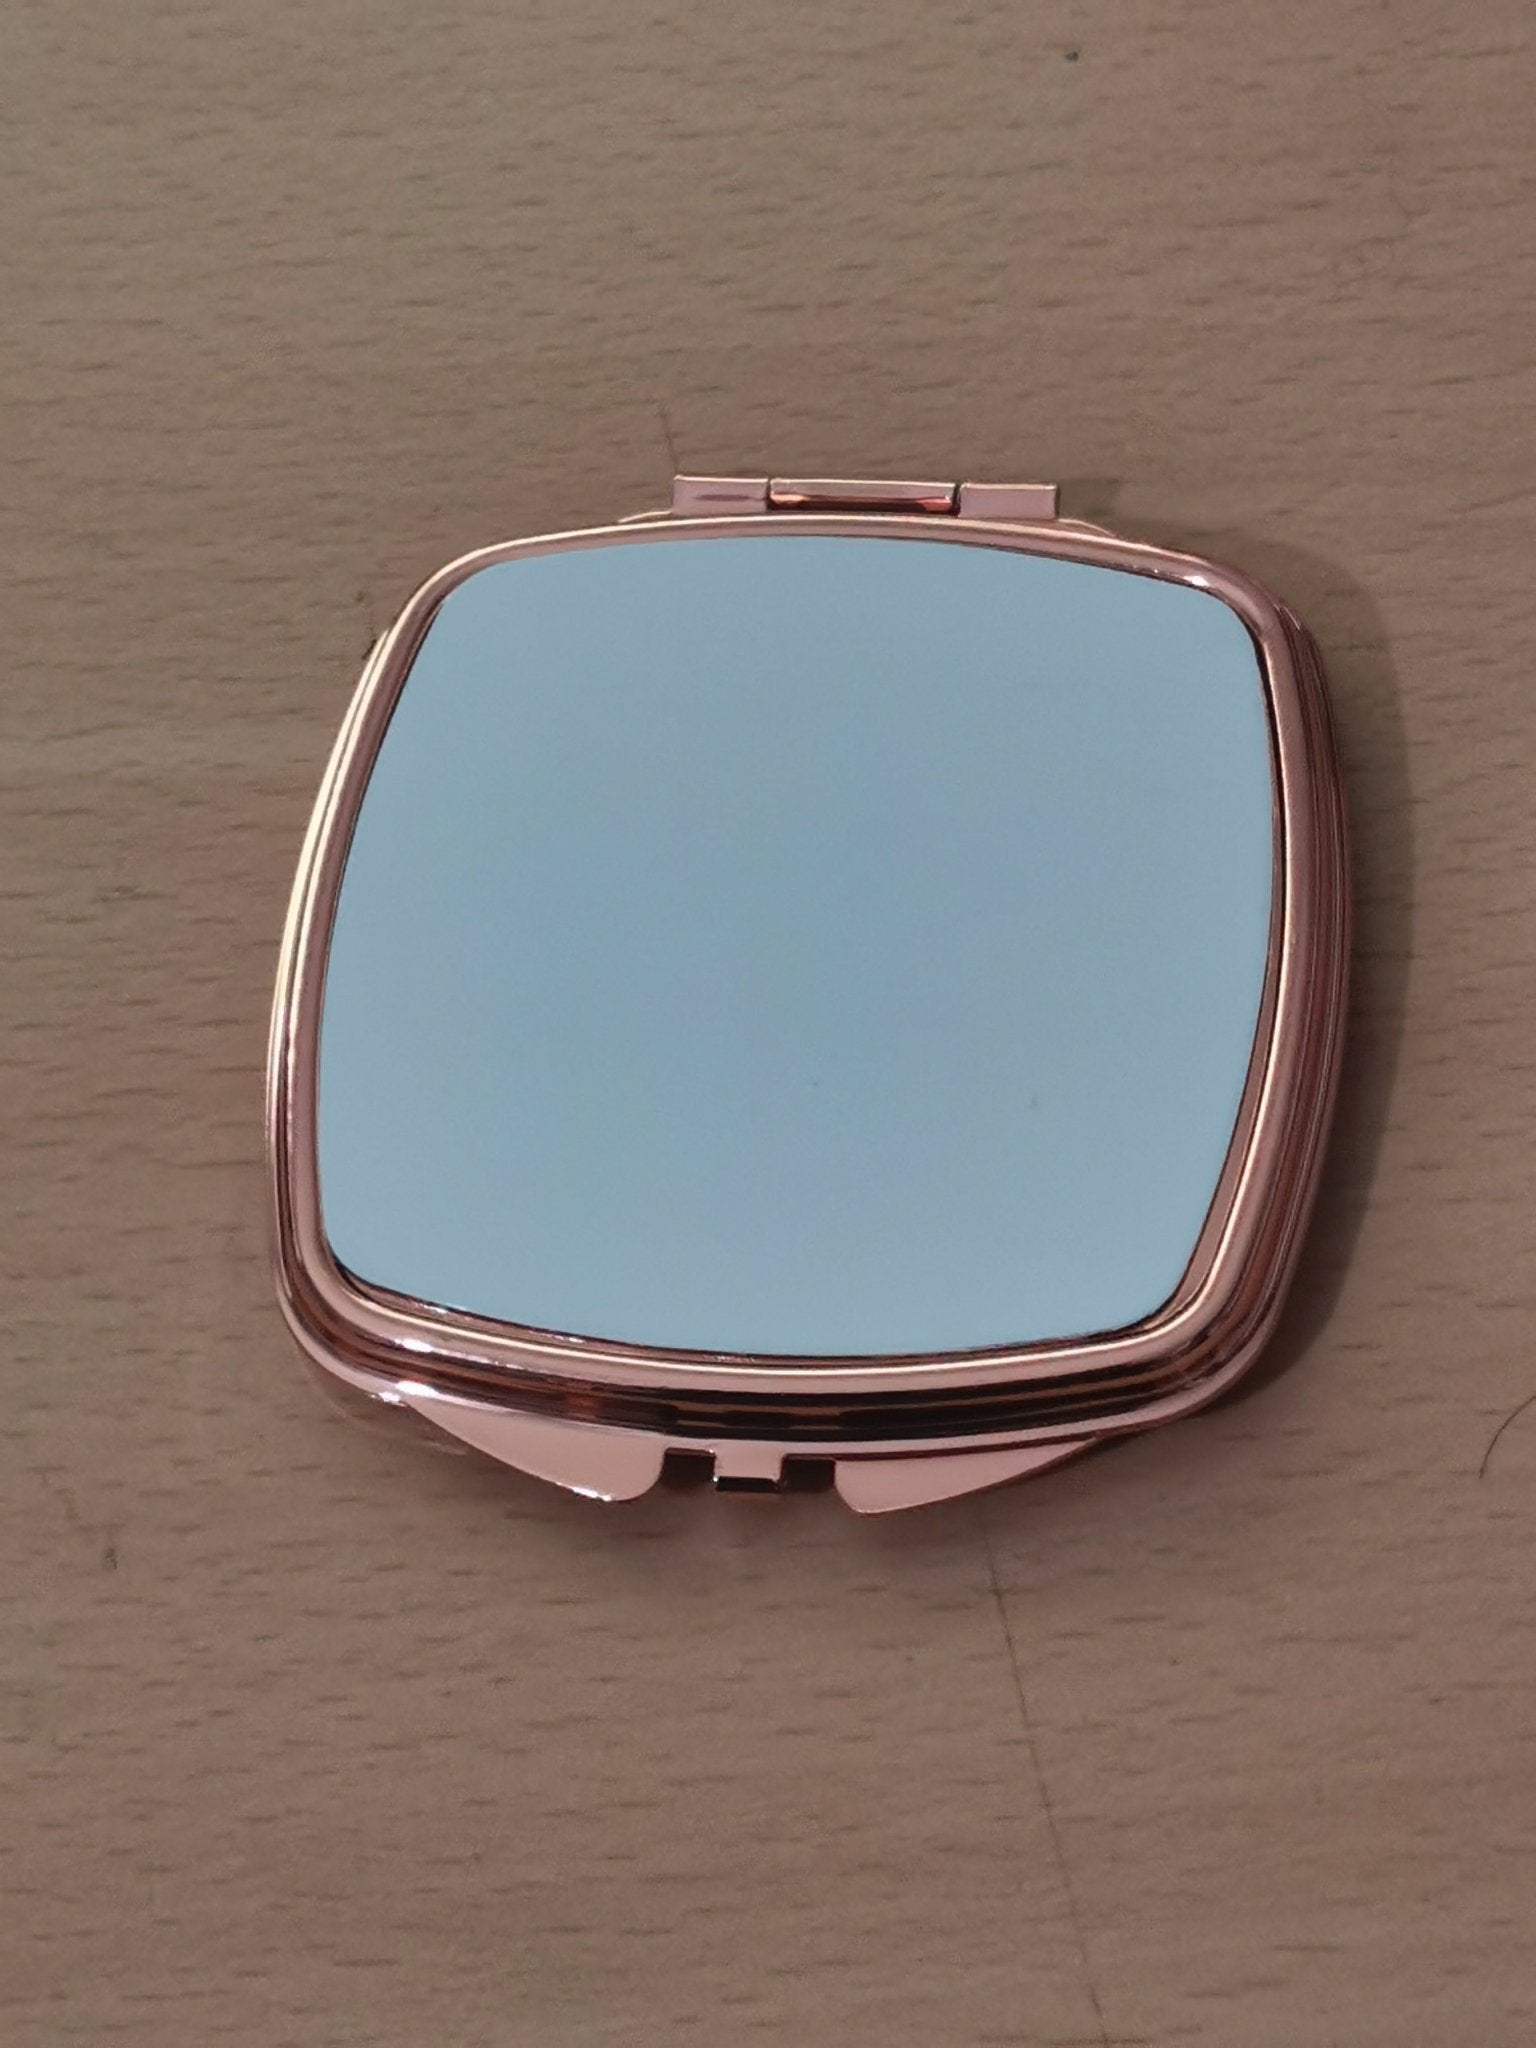 Rose Gold Curved square compact mirrors - artcoasterprinting